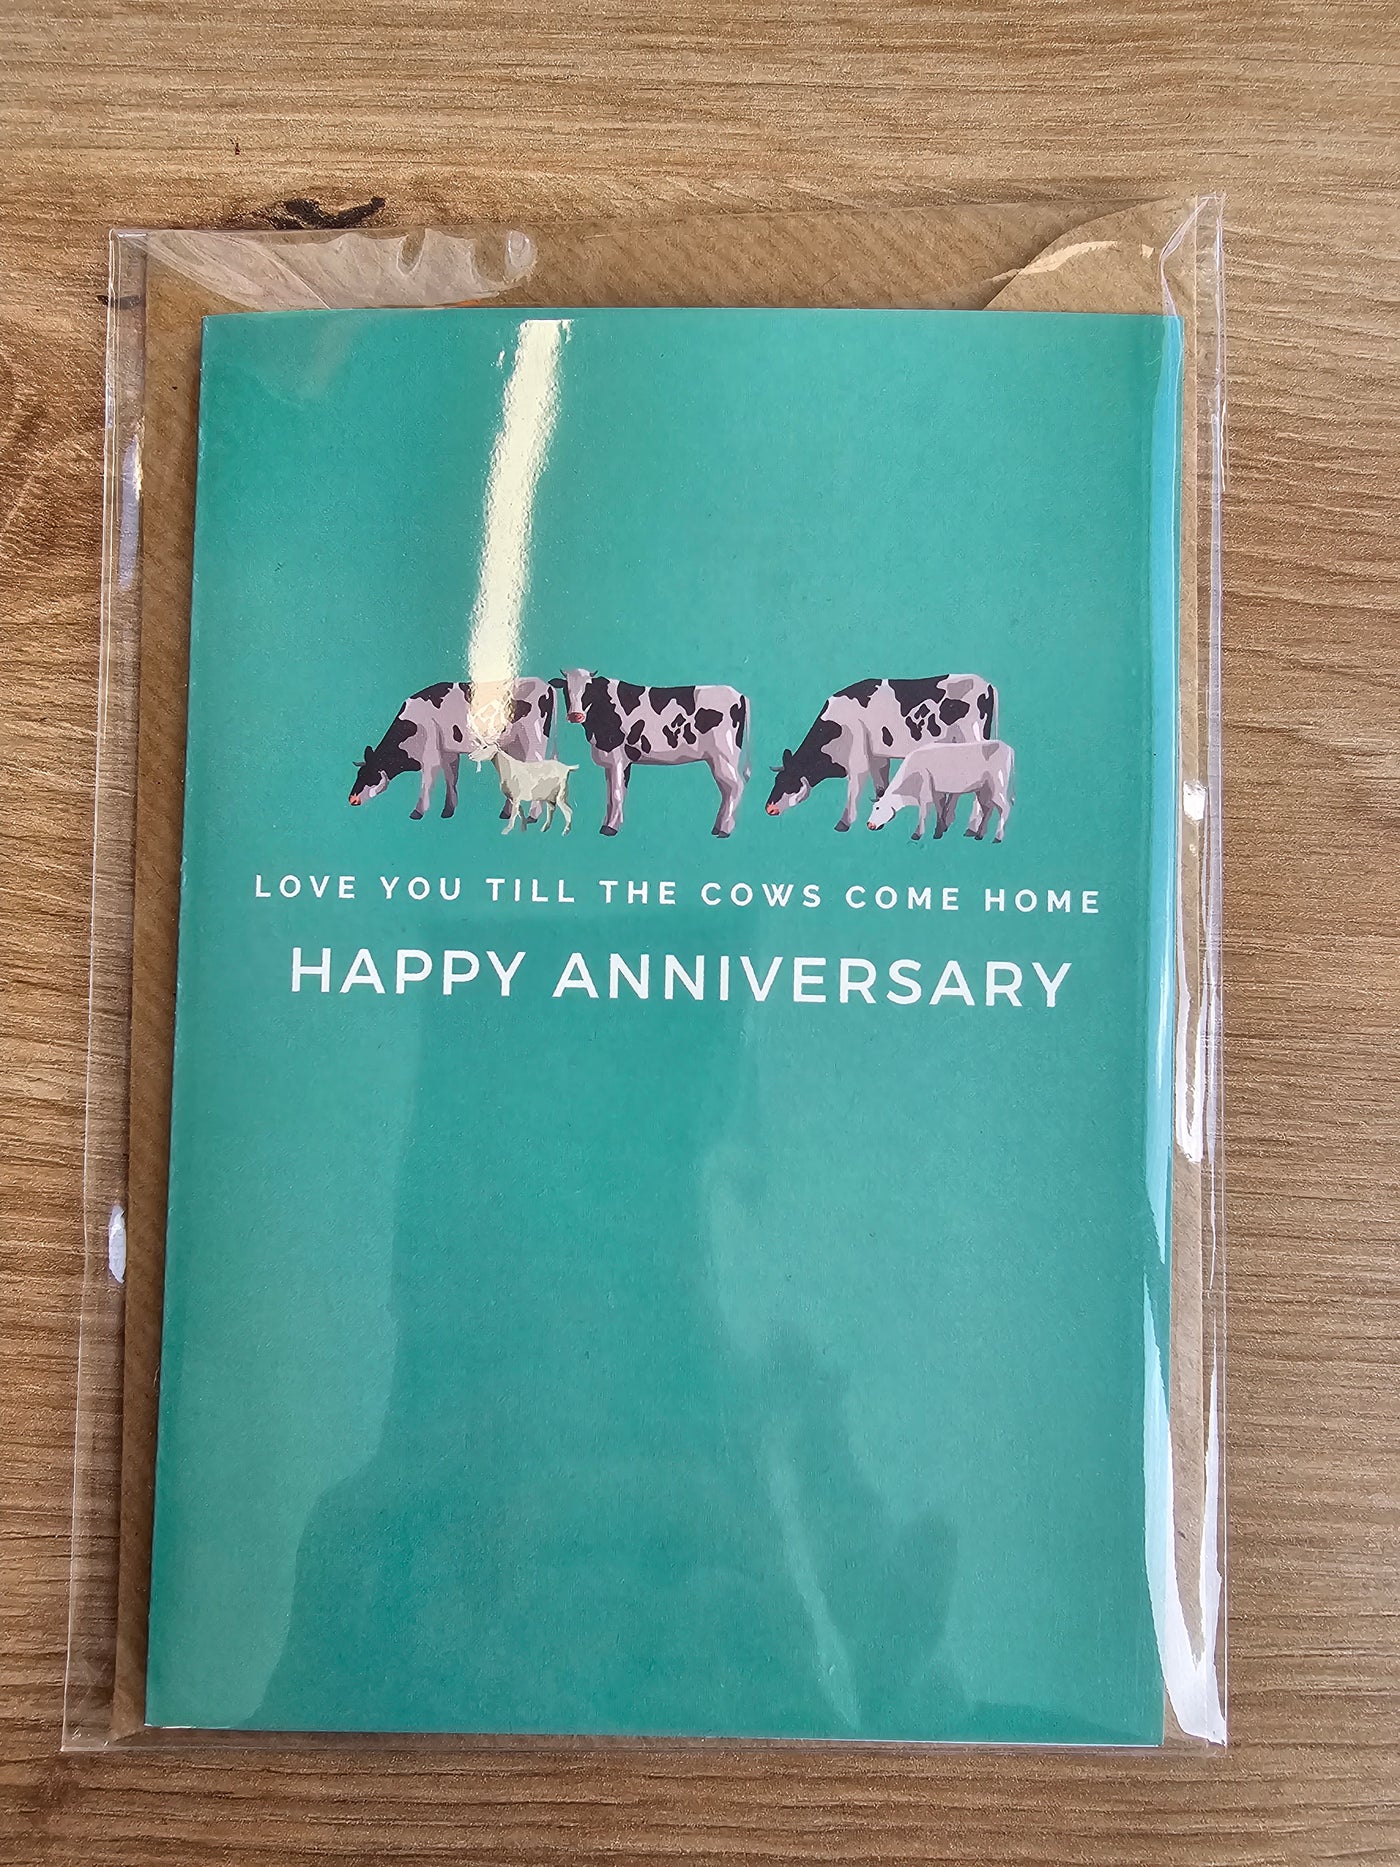 Love You Till the Cows Come Home - Happy Anniversary Card